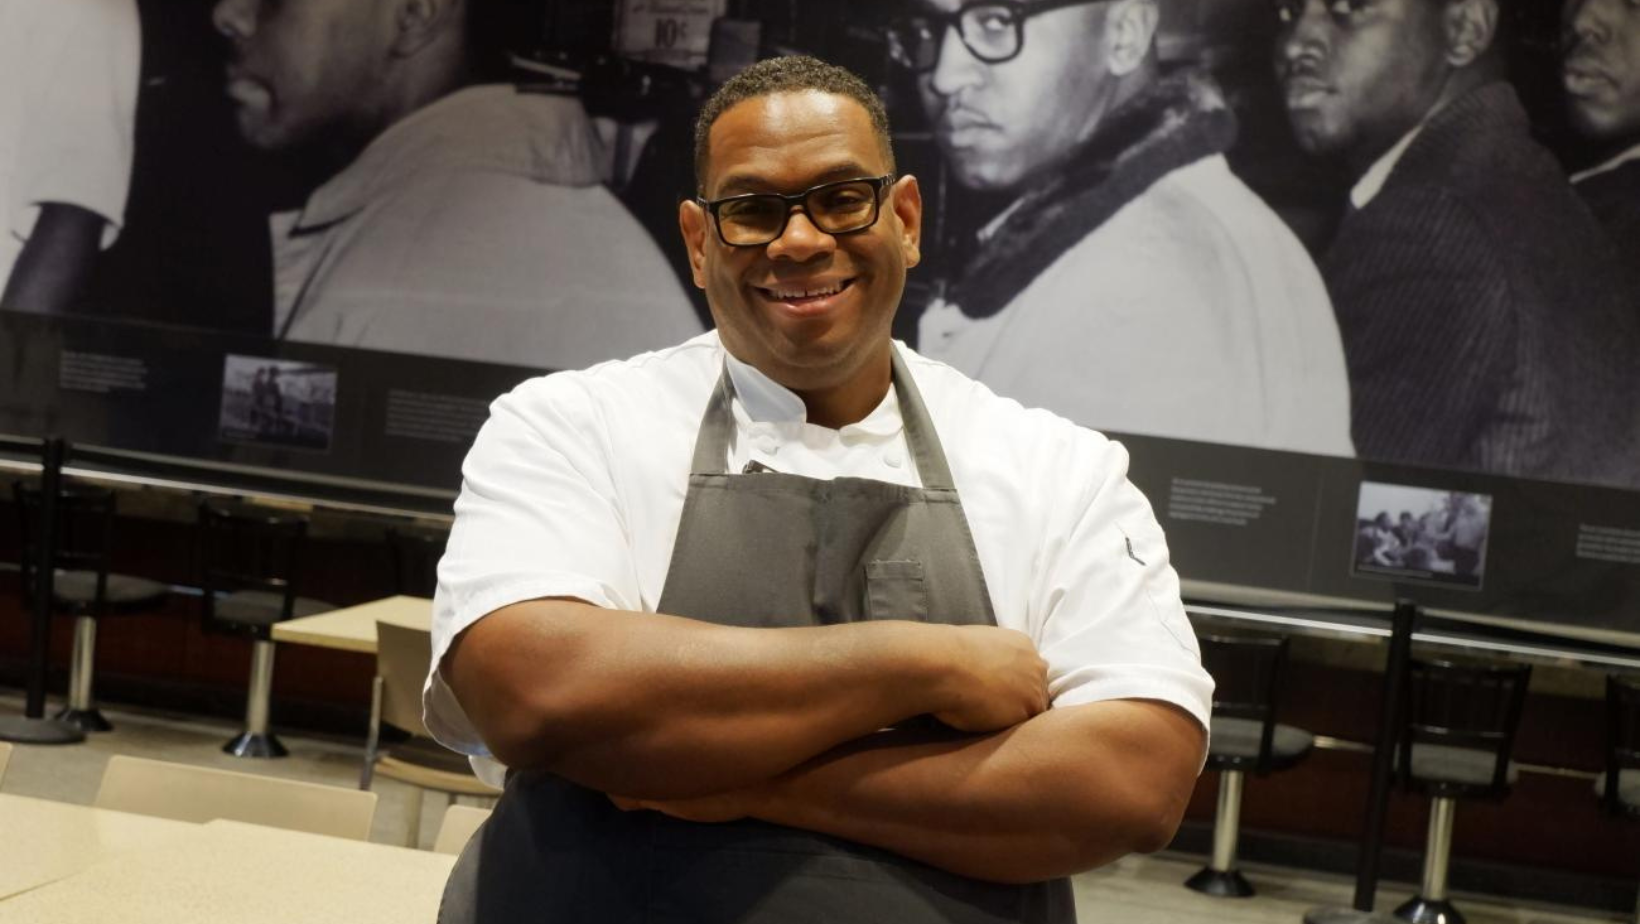 Chef Ramin Coles stands with his arms crossed, smiling widely. He wears a white chef jacket and a black apron.